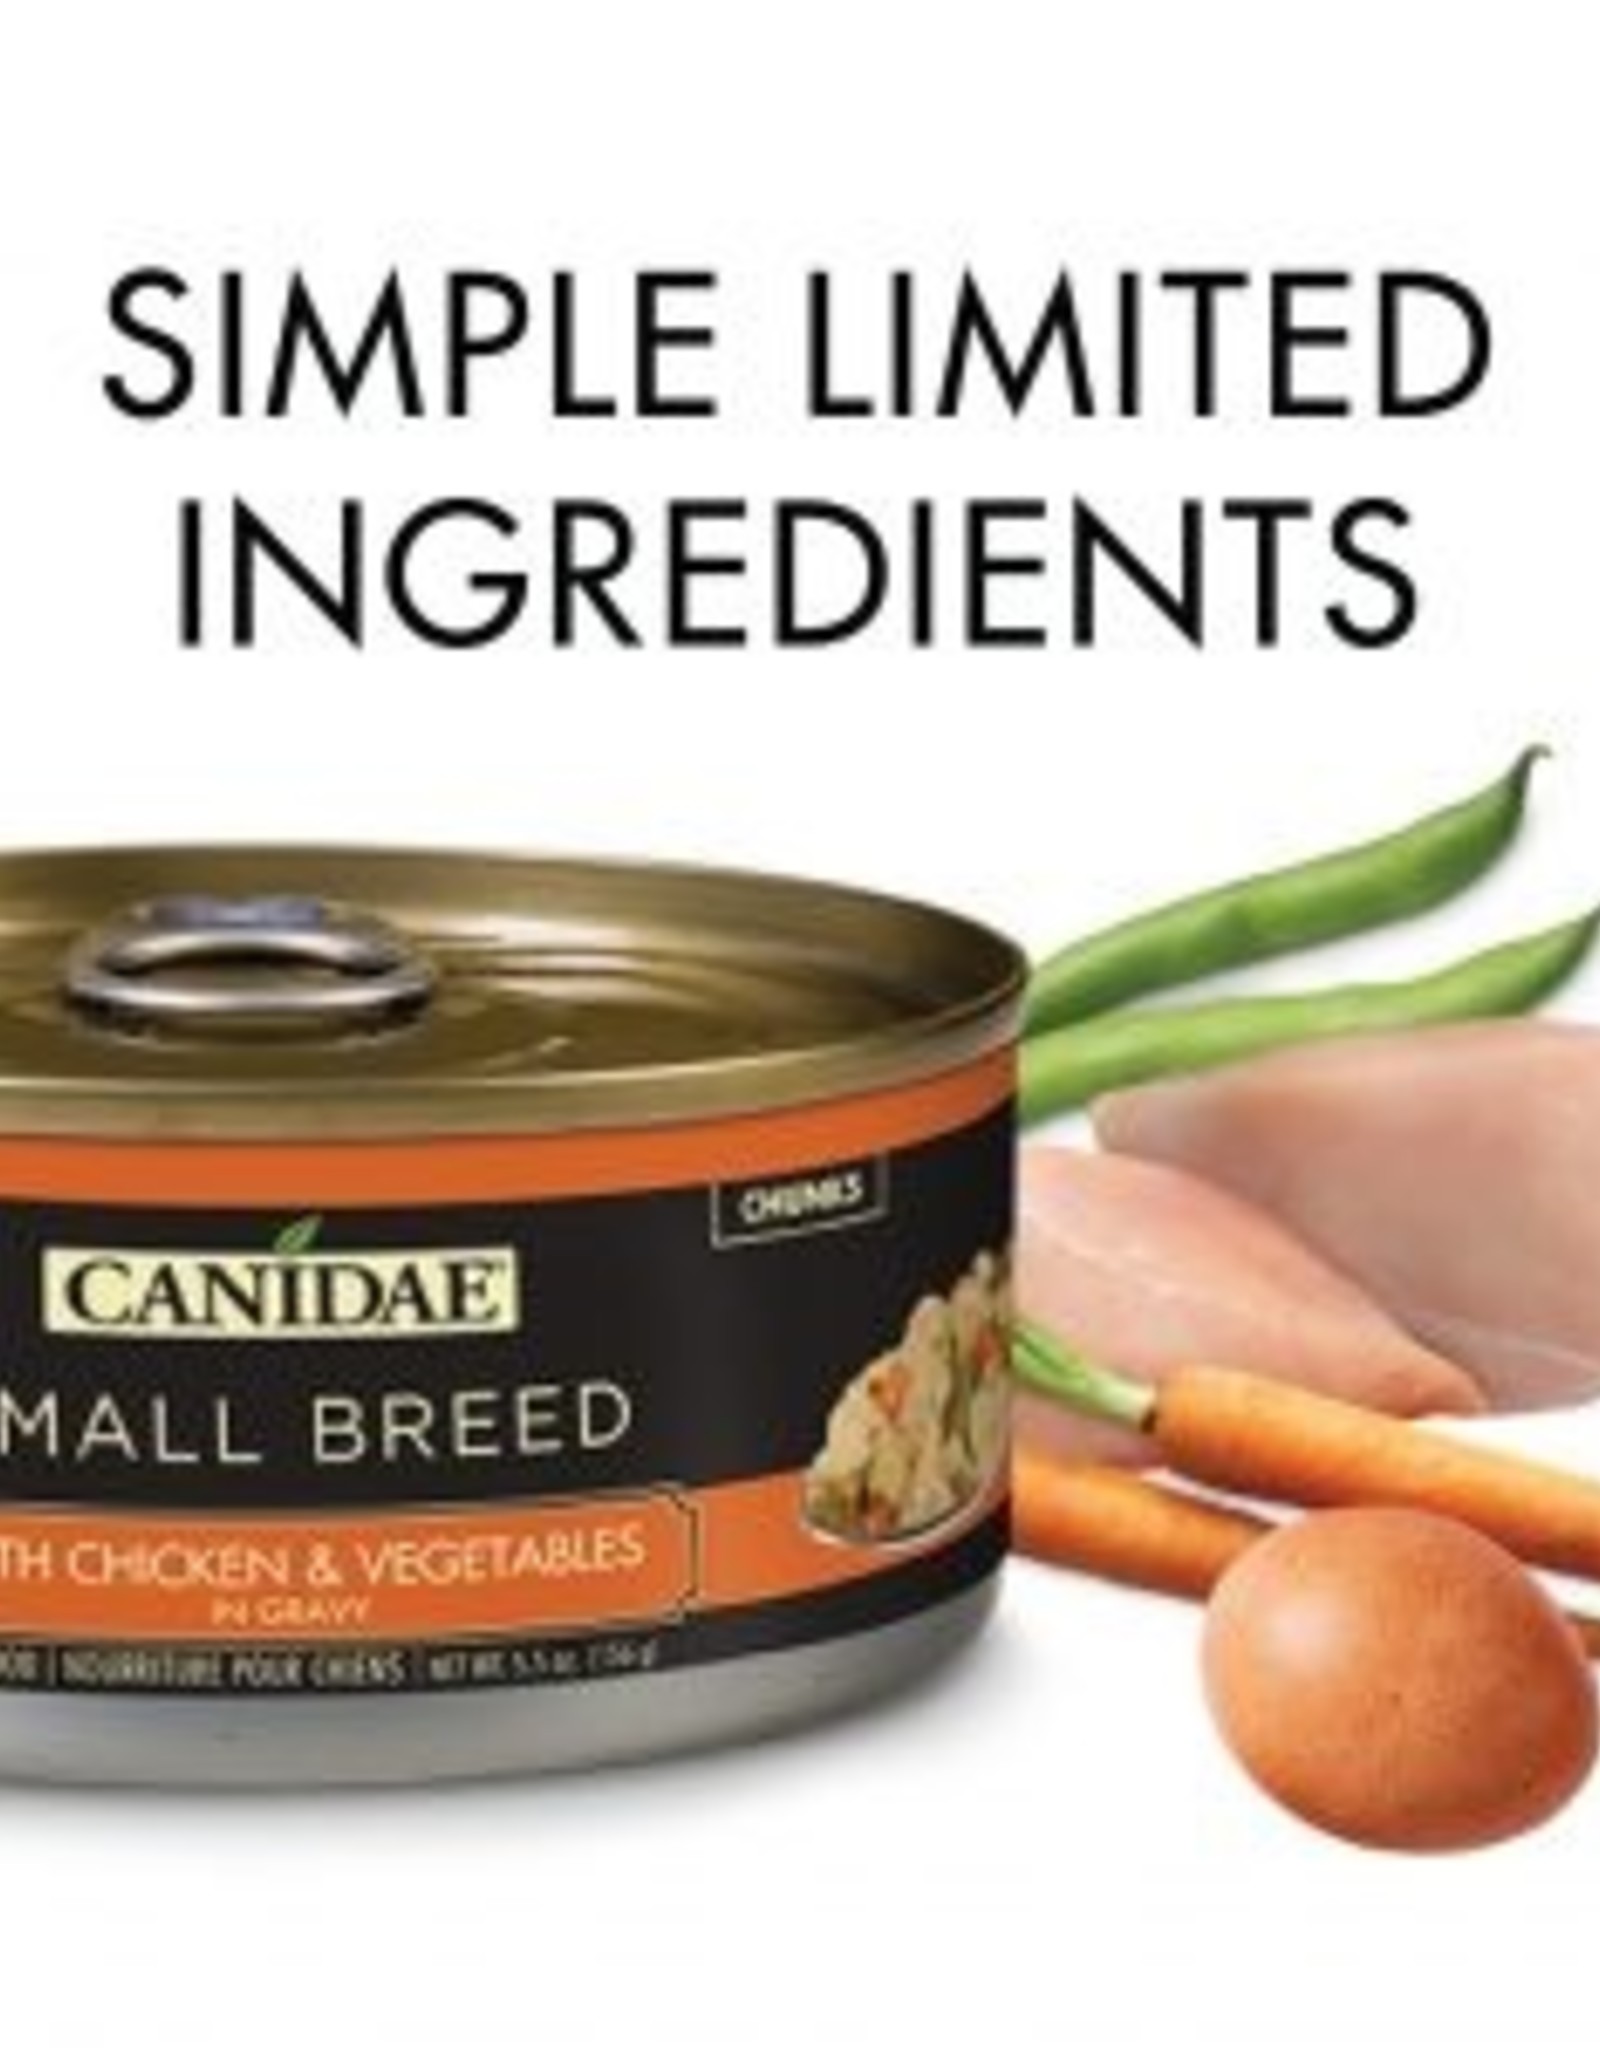 CANIDAE PET FOODS CANIDAE CAN DOG SMALL BREED CHICKEN, VEGETABLES IN GRAVY 5.5OZ CASE OF 24